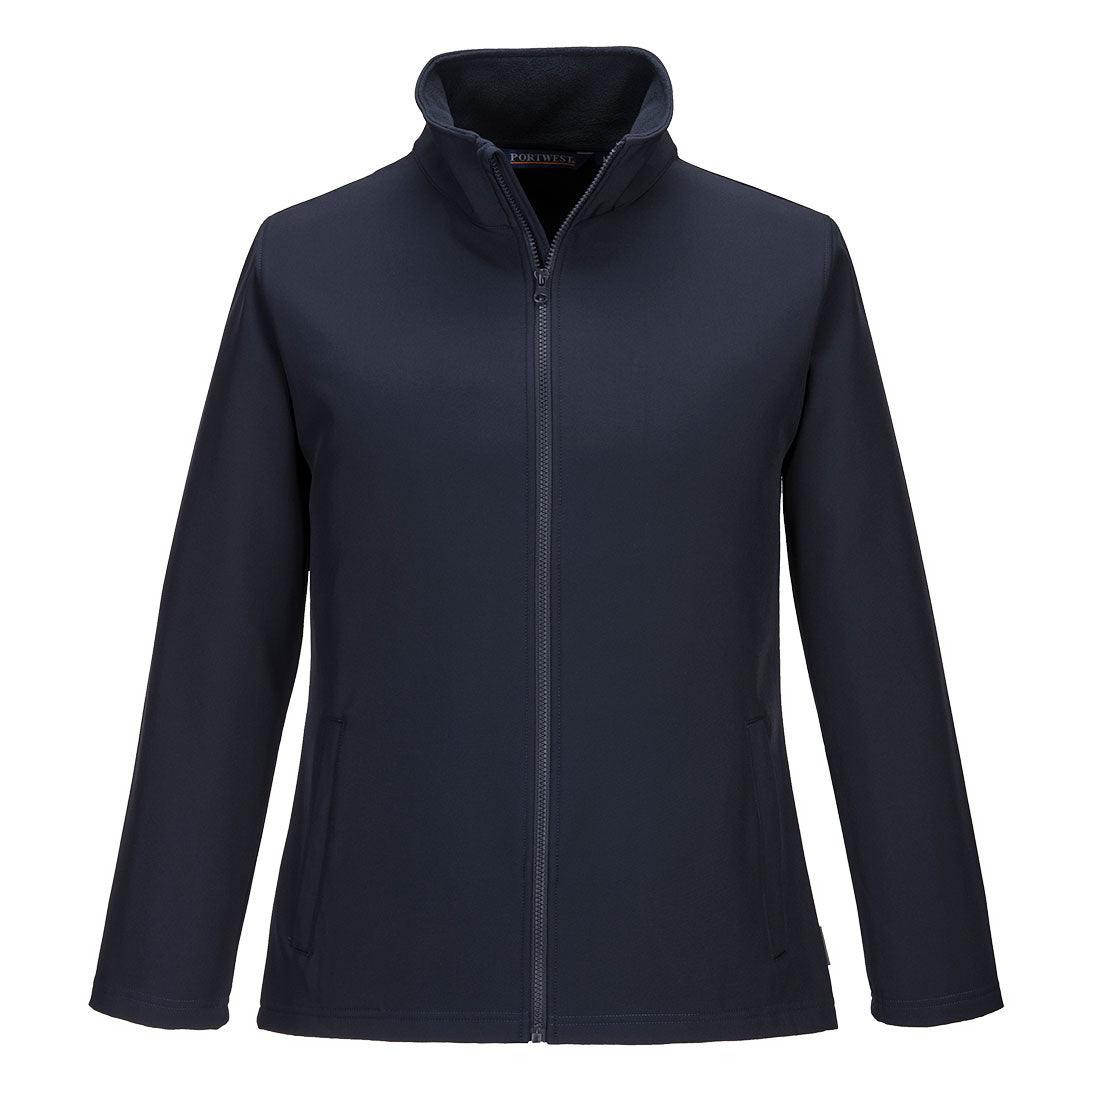 Portwest Women's Print and Promo Softshell